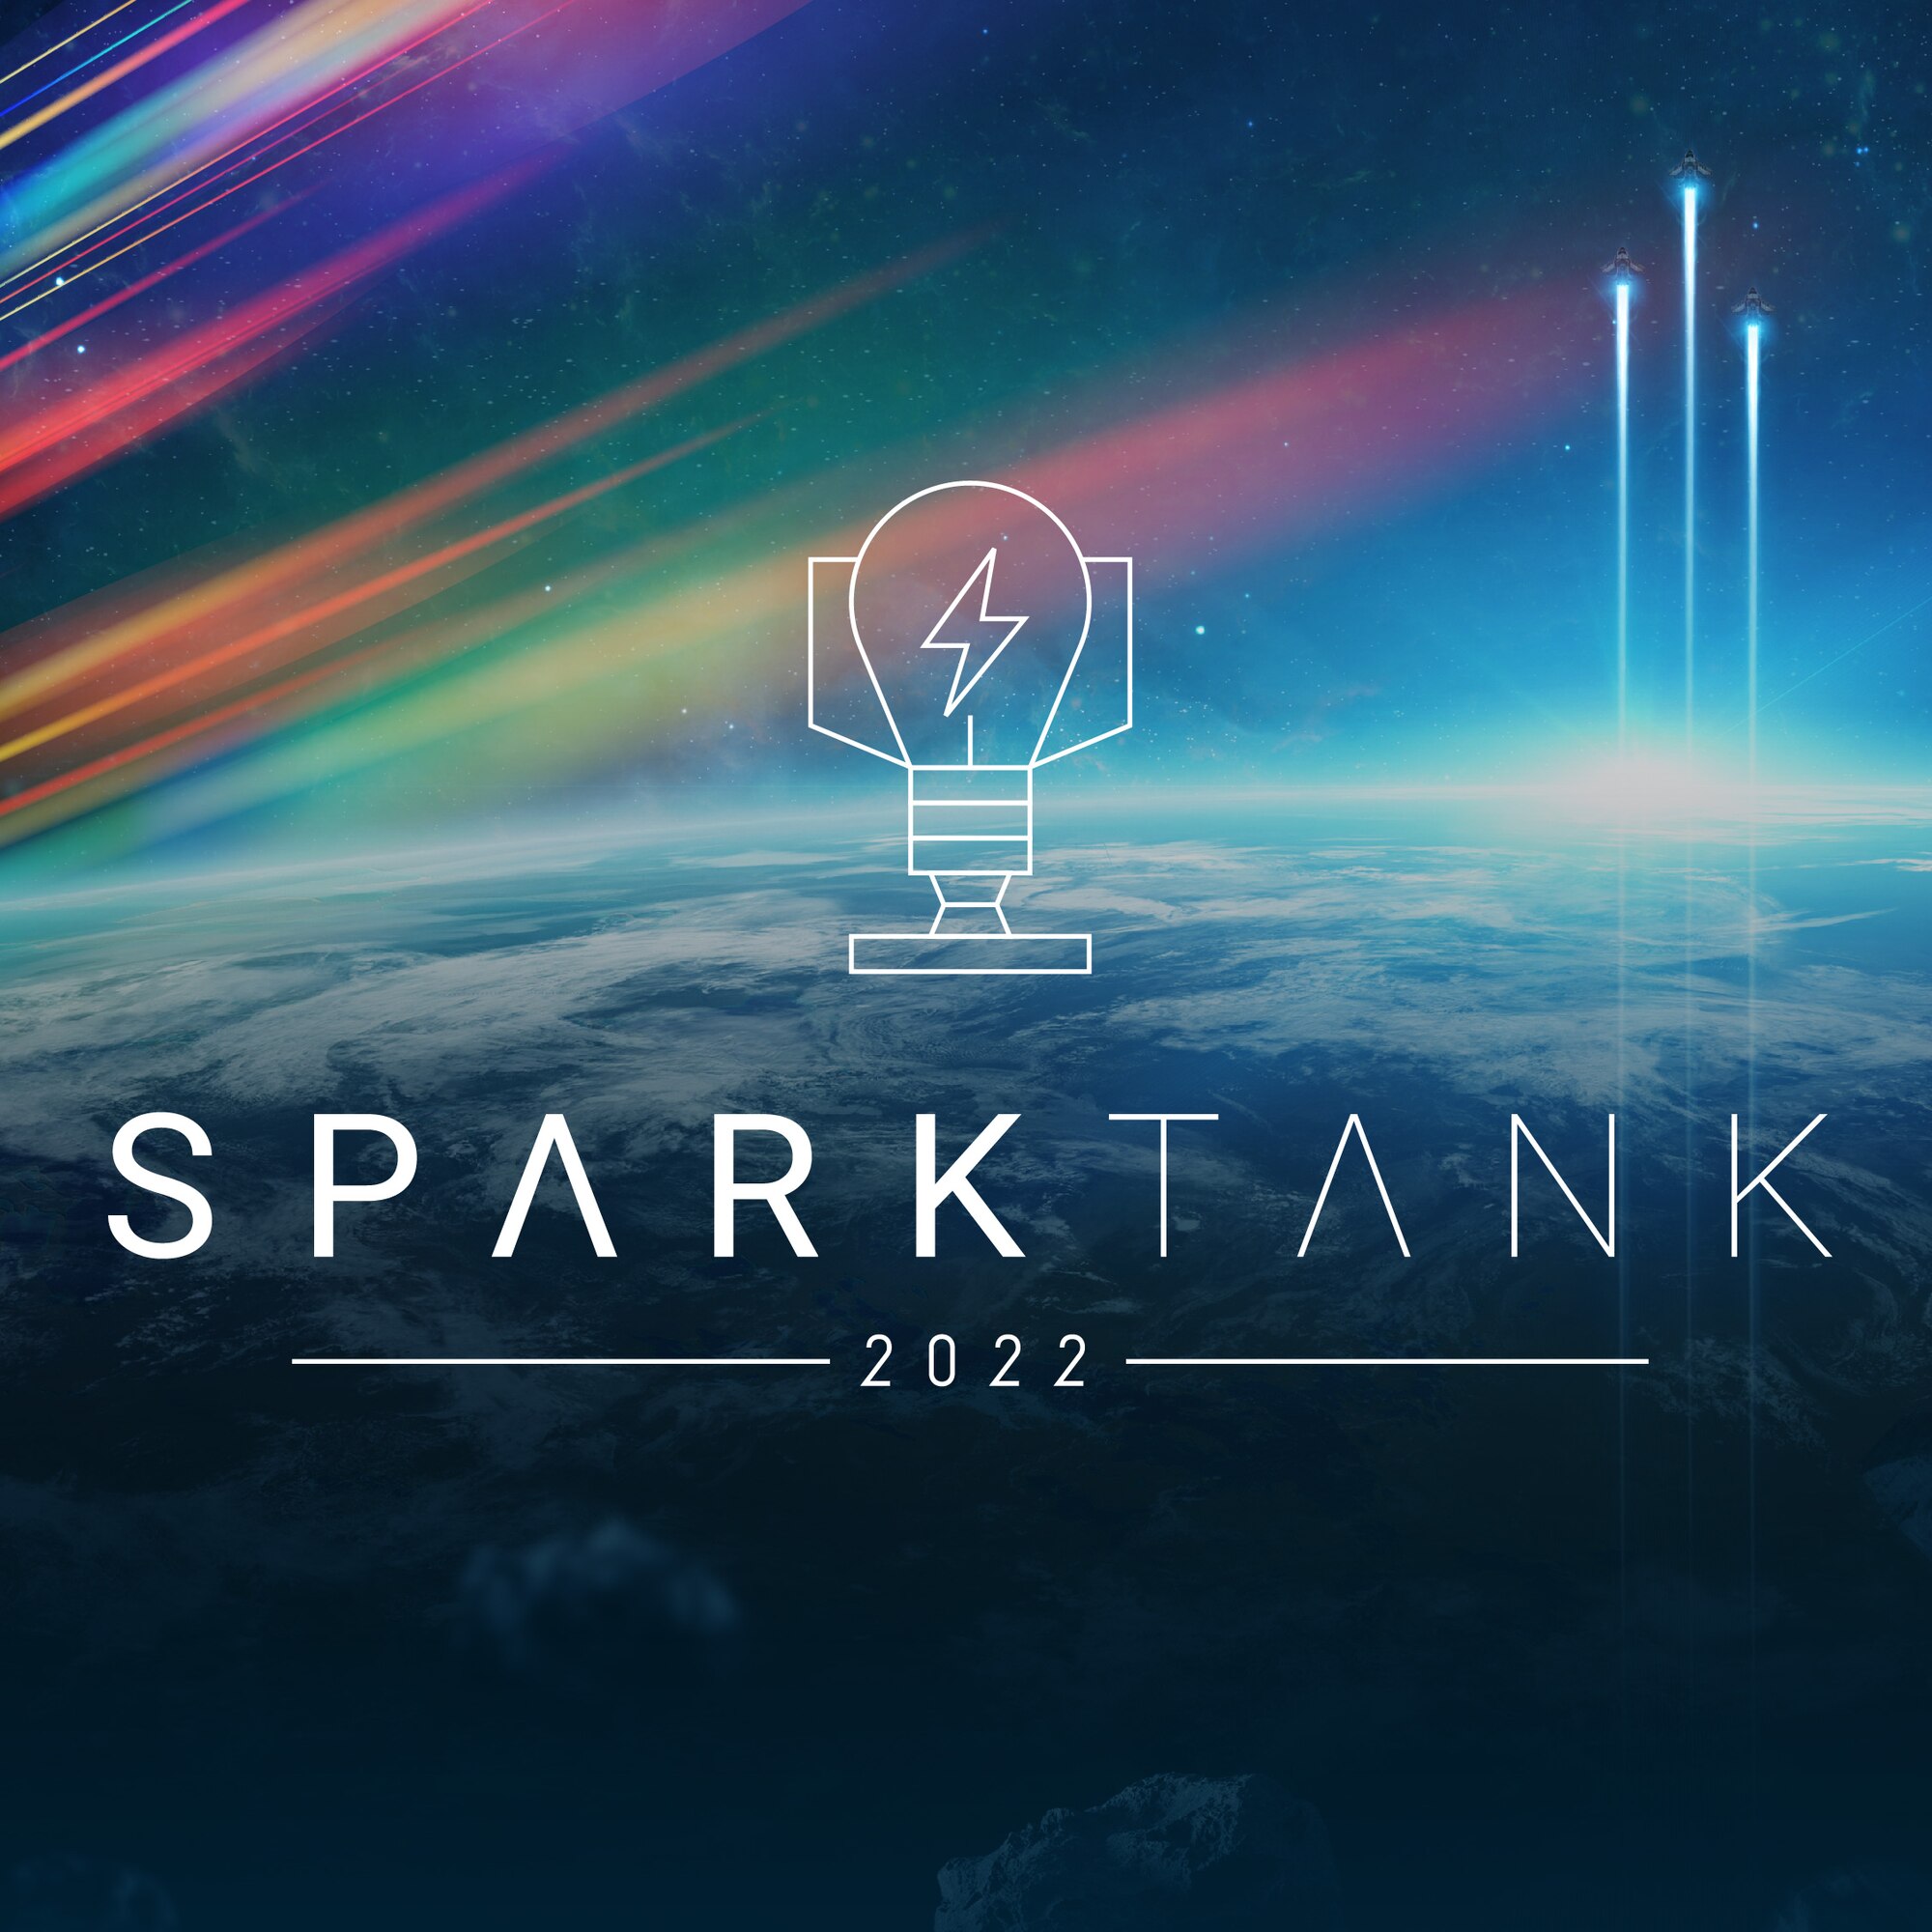 Cast a vote for your favorite entry in the Department of the Air Force Spark Tank 2022 competition. Online polling is open through March 4. Finalists will take the stage March 4 in Orlando, Florida, during the Air Force Association’s Air Warfare Symposium, to pitch their innovation ideas to Air Force and Space Force senior leadership and industry experts. The audience poll will select the Fan Favorite and be included in the panel’s votes to determine the Spark Tank winner. (Courtesy graphic)